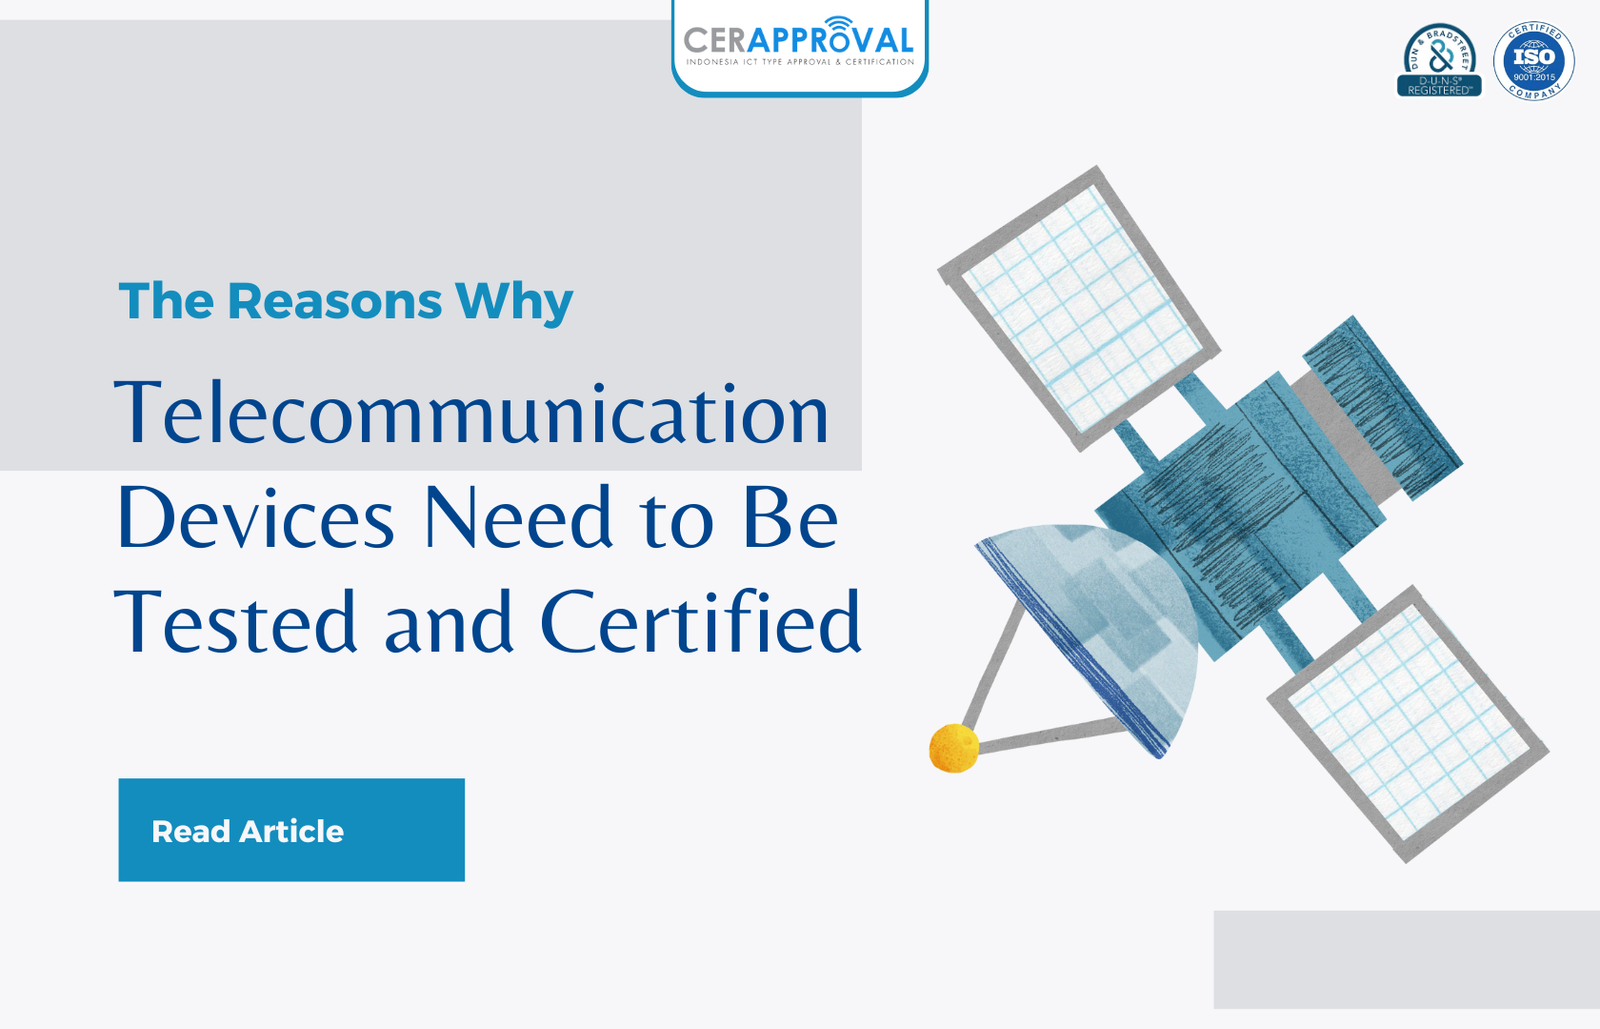 Why Telecommunication Devices Need to Be Tested and Certified?